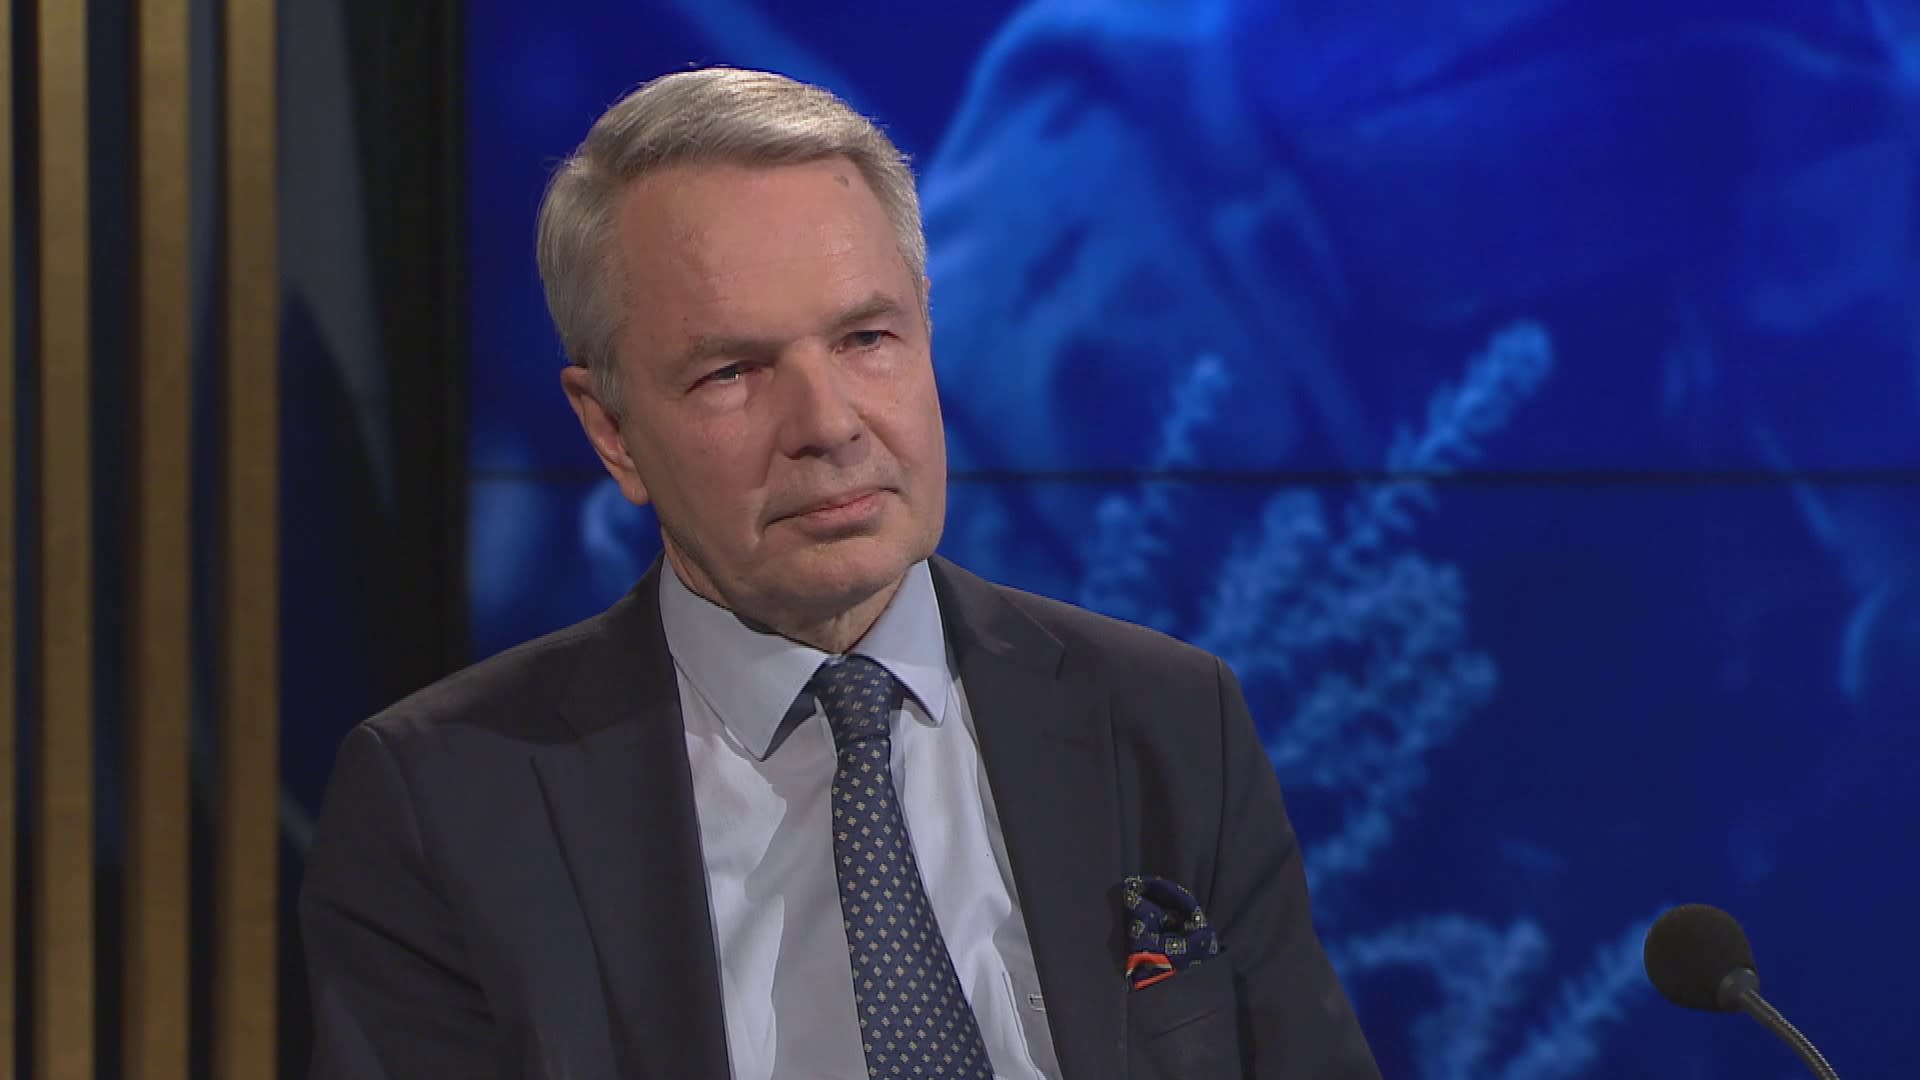 Haavisto: Finland has not received updated requirements from Turkey